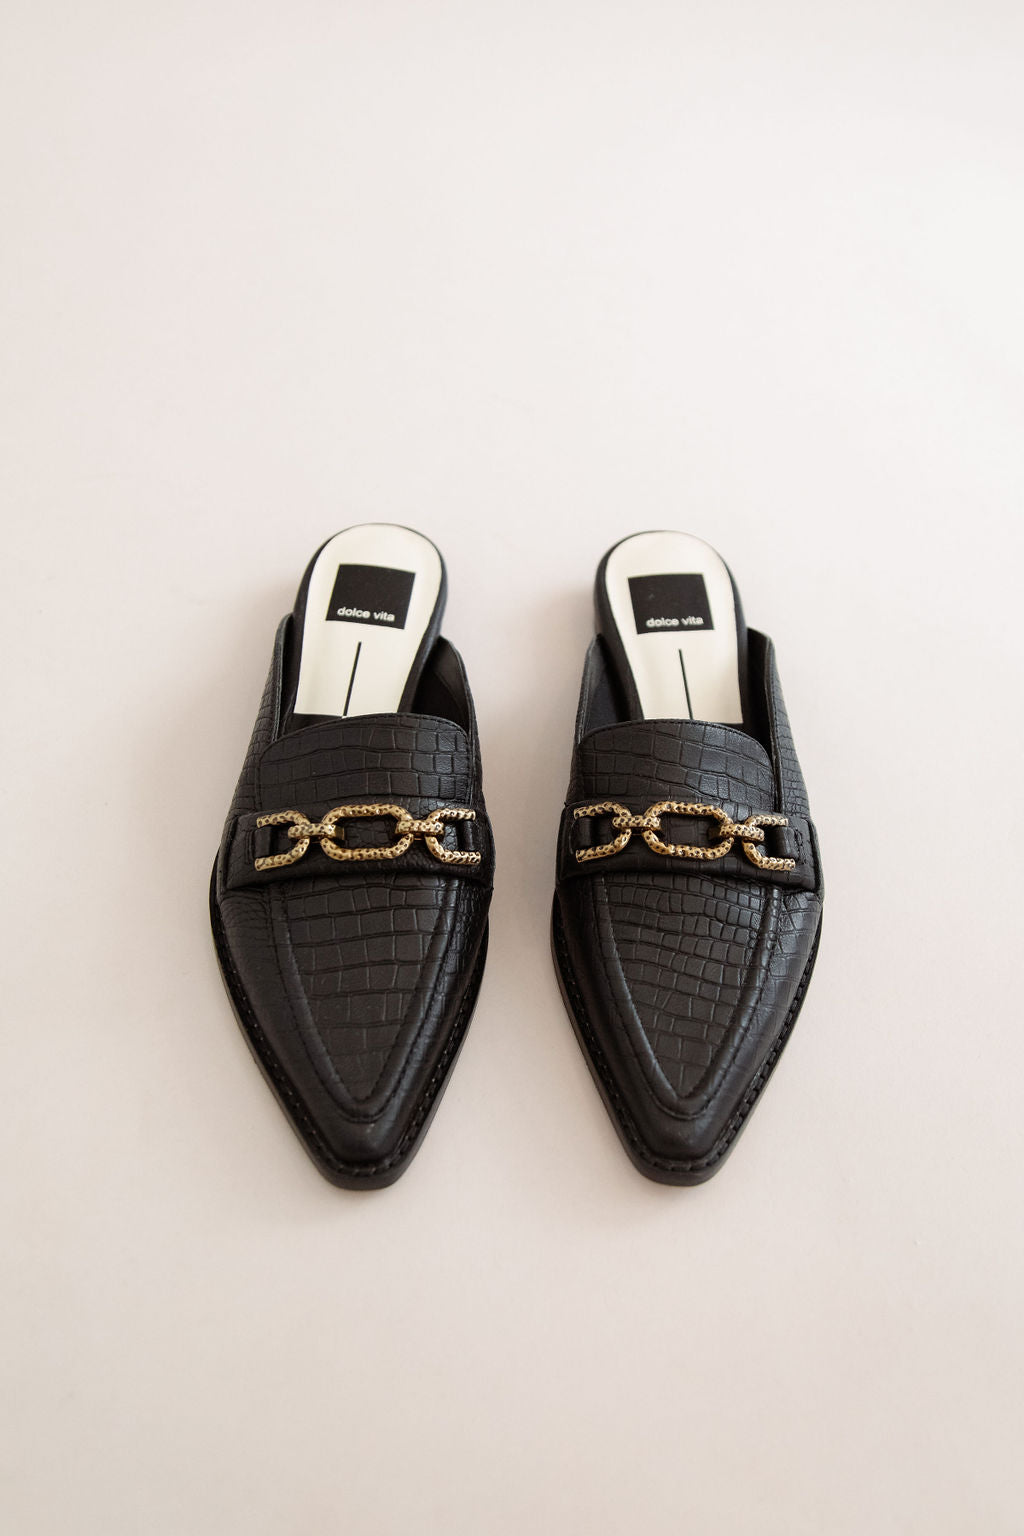 Dolce Vita | Sidon Flats | Noir Embossed Leather - Poppy and Stella